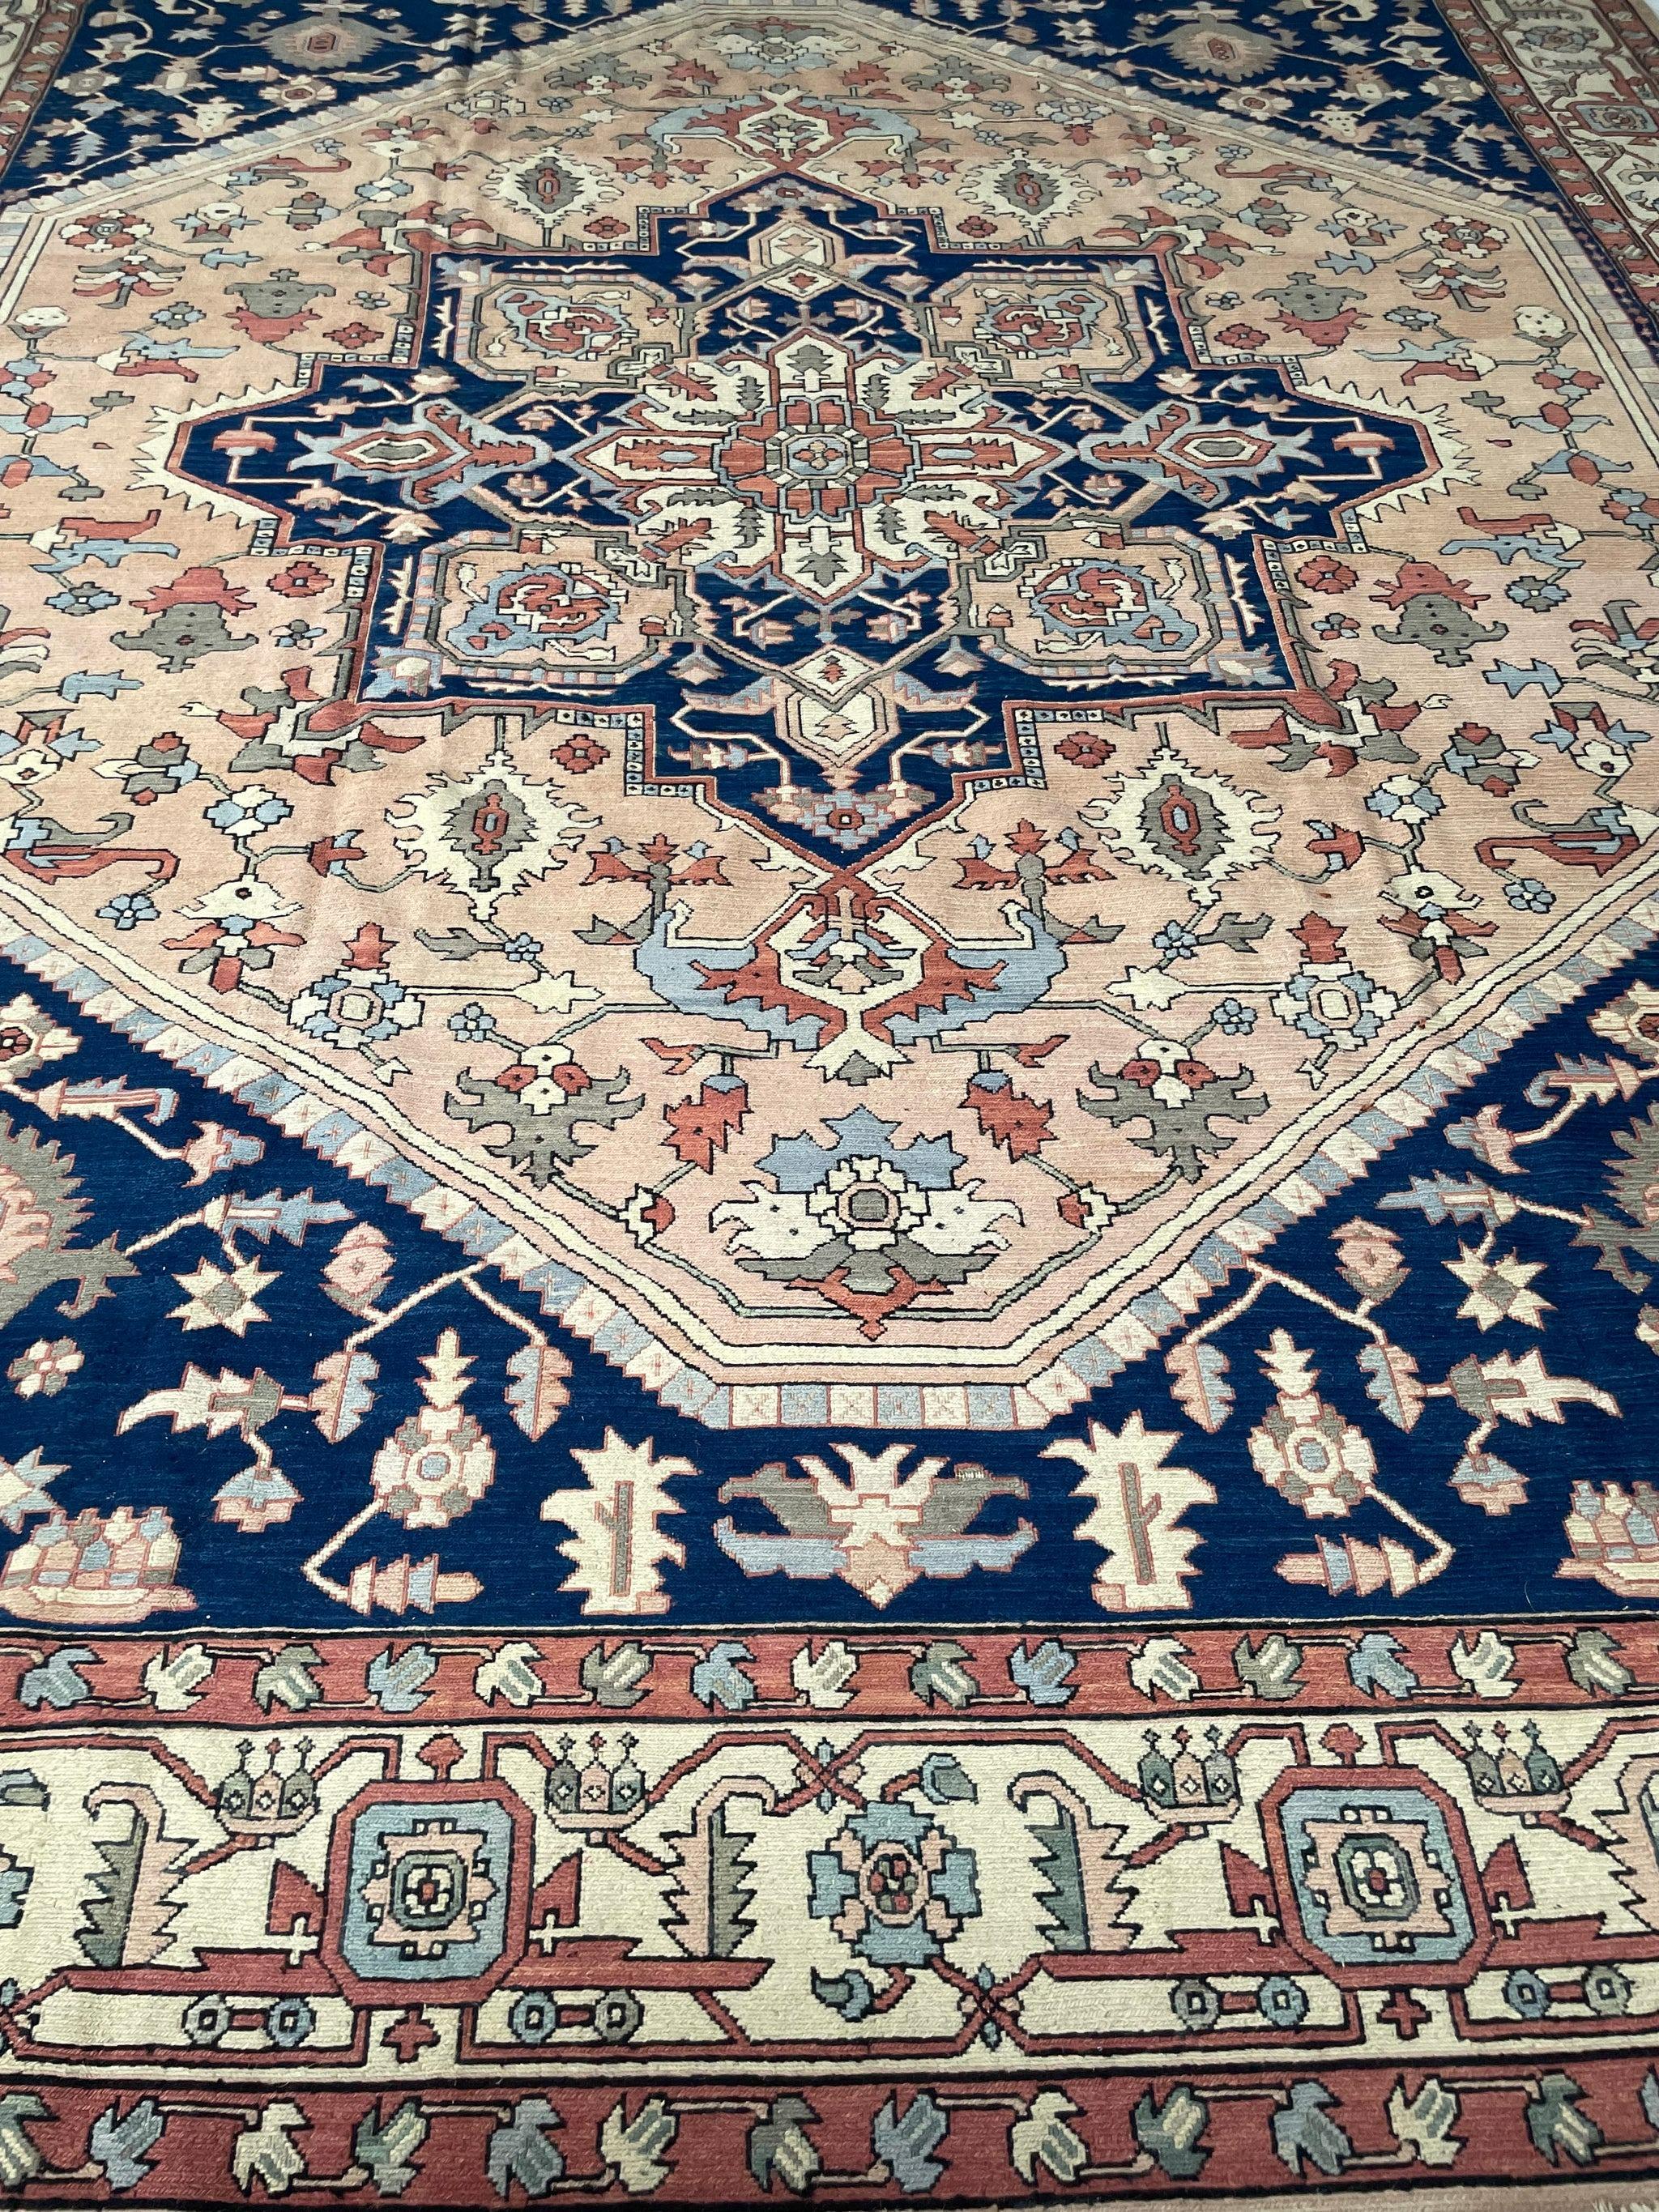 Enormous Palace Size Vintage rug Northwest Tribal Apricot, Nude, Sage, Olive, Denim, Cobalt

About: Nude, Apricot, Denim, Cobalt, Peach, Salmon, Sage, Olive, Taupe, Grey, Green, and more!! This really has a nice softness to it because of the